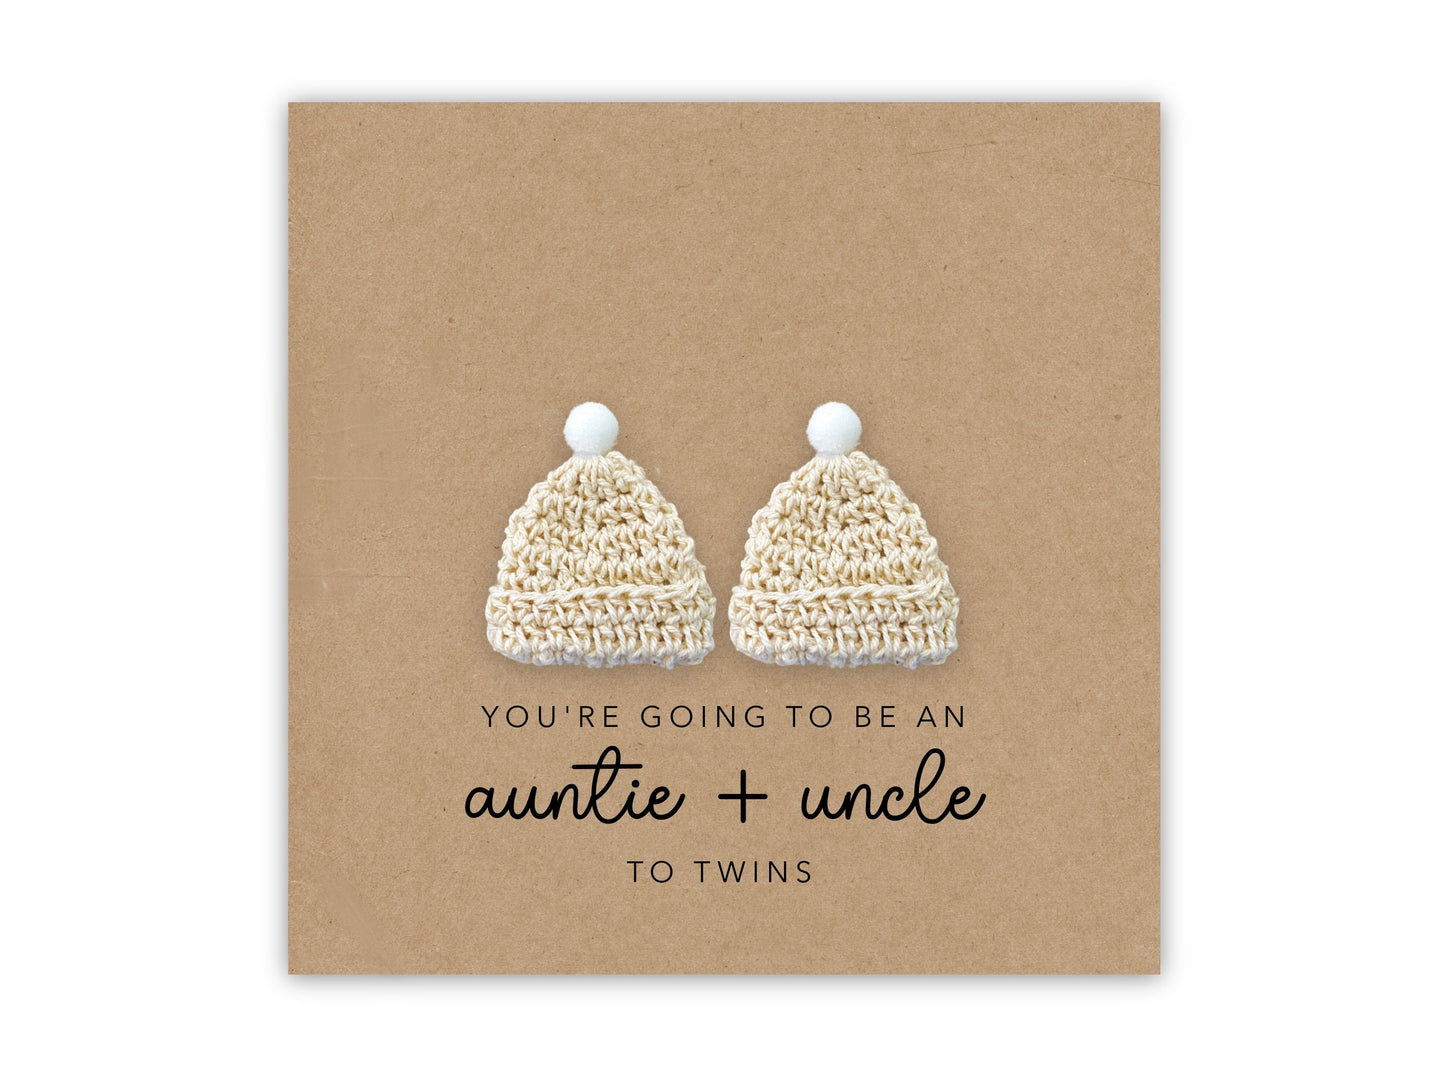 Pregnancy Announcement Card, Baby Announcement Card, Surprise Baby Reveal, New Twin Uncle Card, You're Going to be an Uncle to Twins